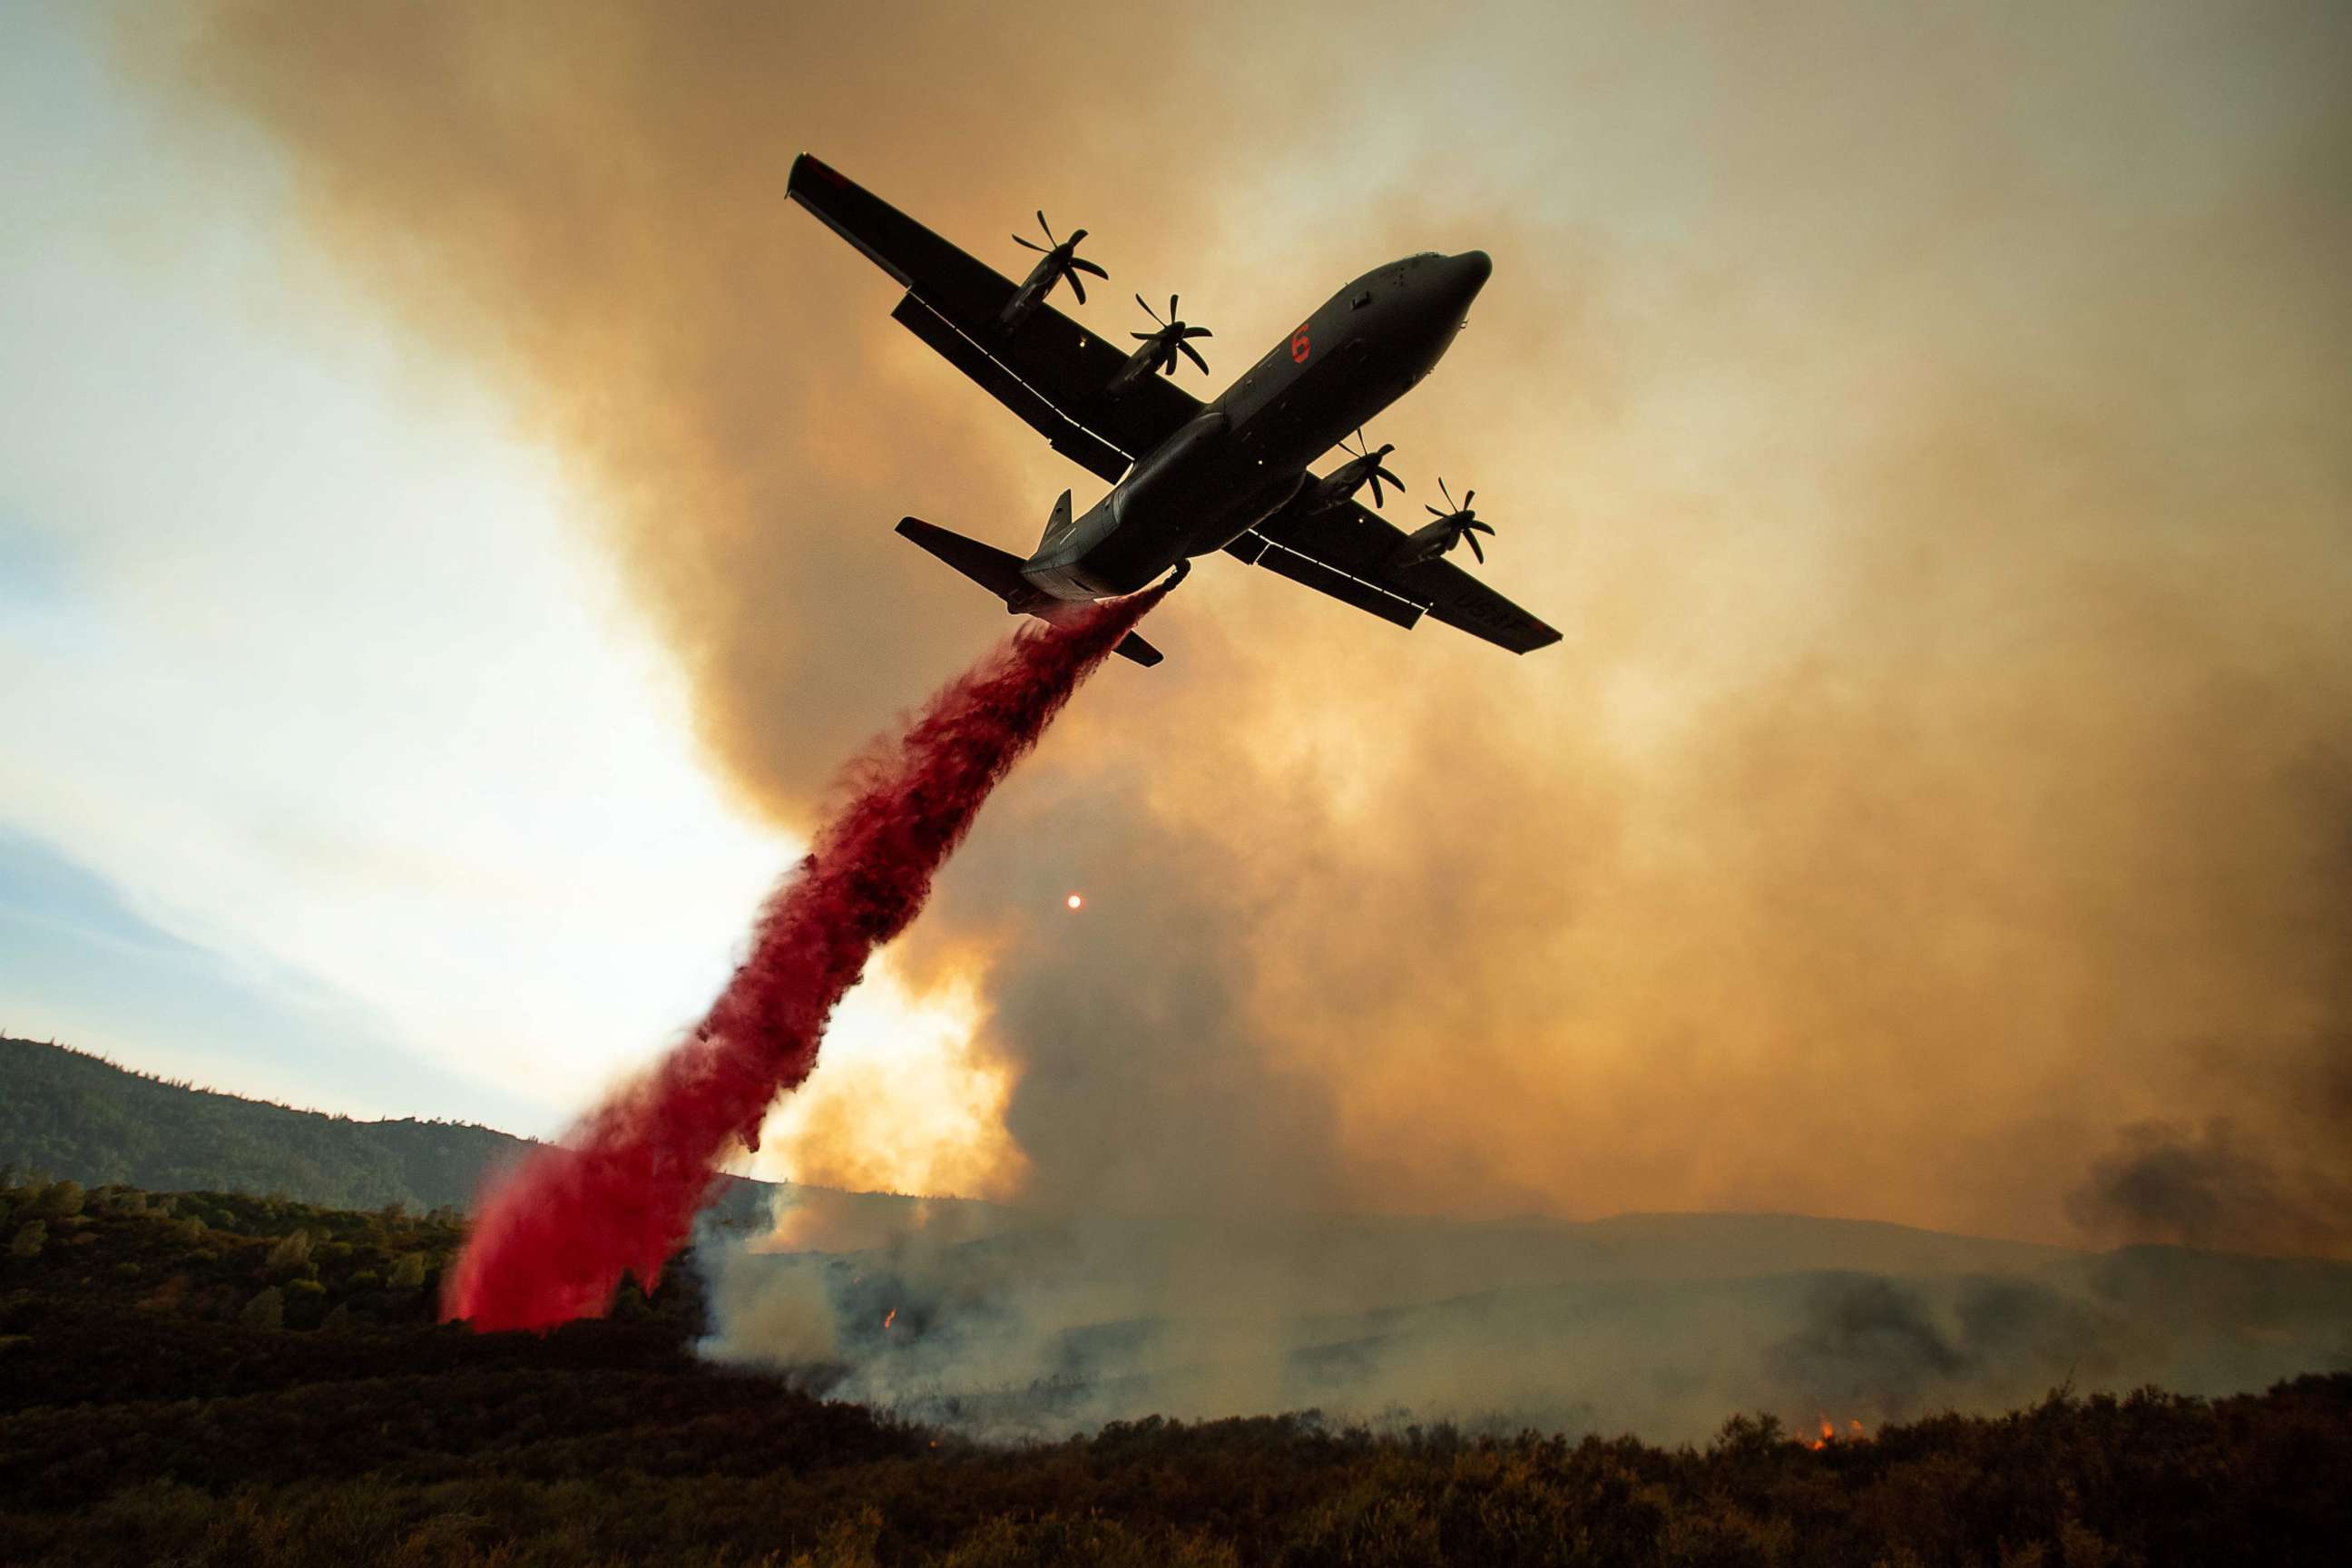 PHOTO: An air tanker drops retardant on the Ranch Fire, part of the Mendocino Complex Fire, burning along High Valley Rd near Clearlake Oaks, California, Aug. 5, 2018.